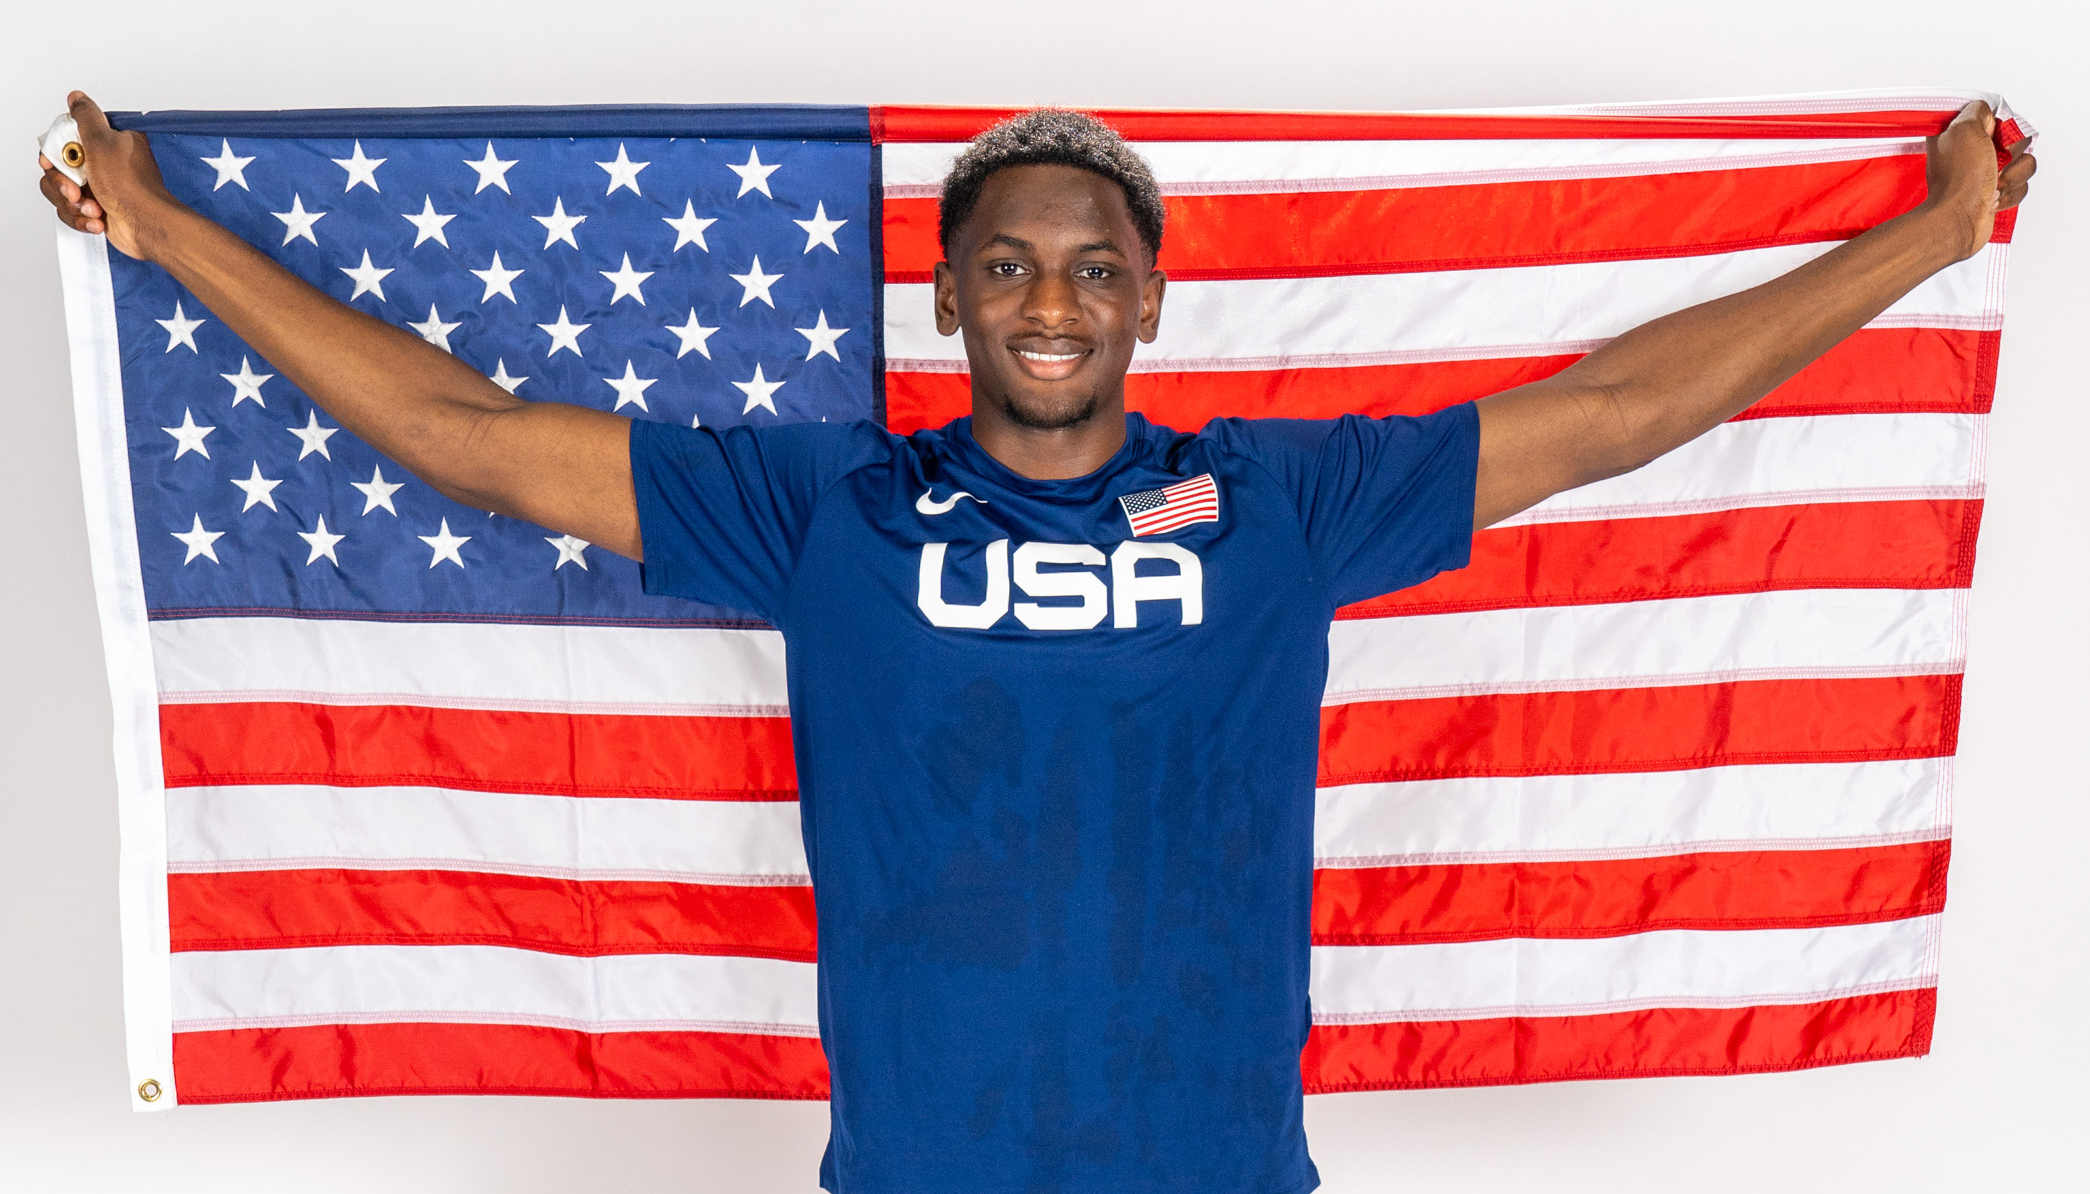 A young male athlete triumphantly holds up the American flag.